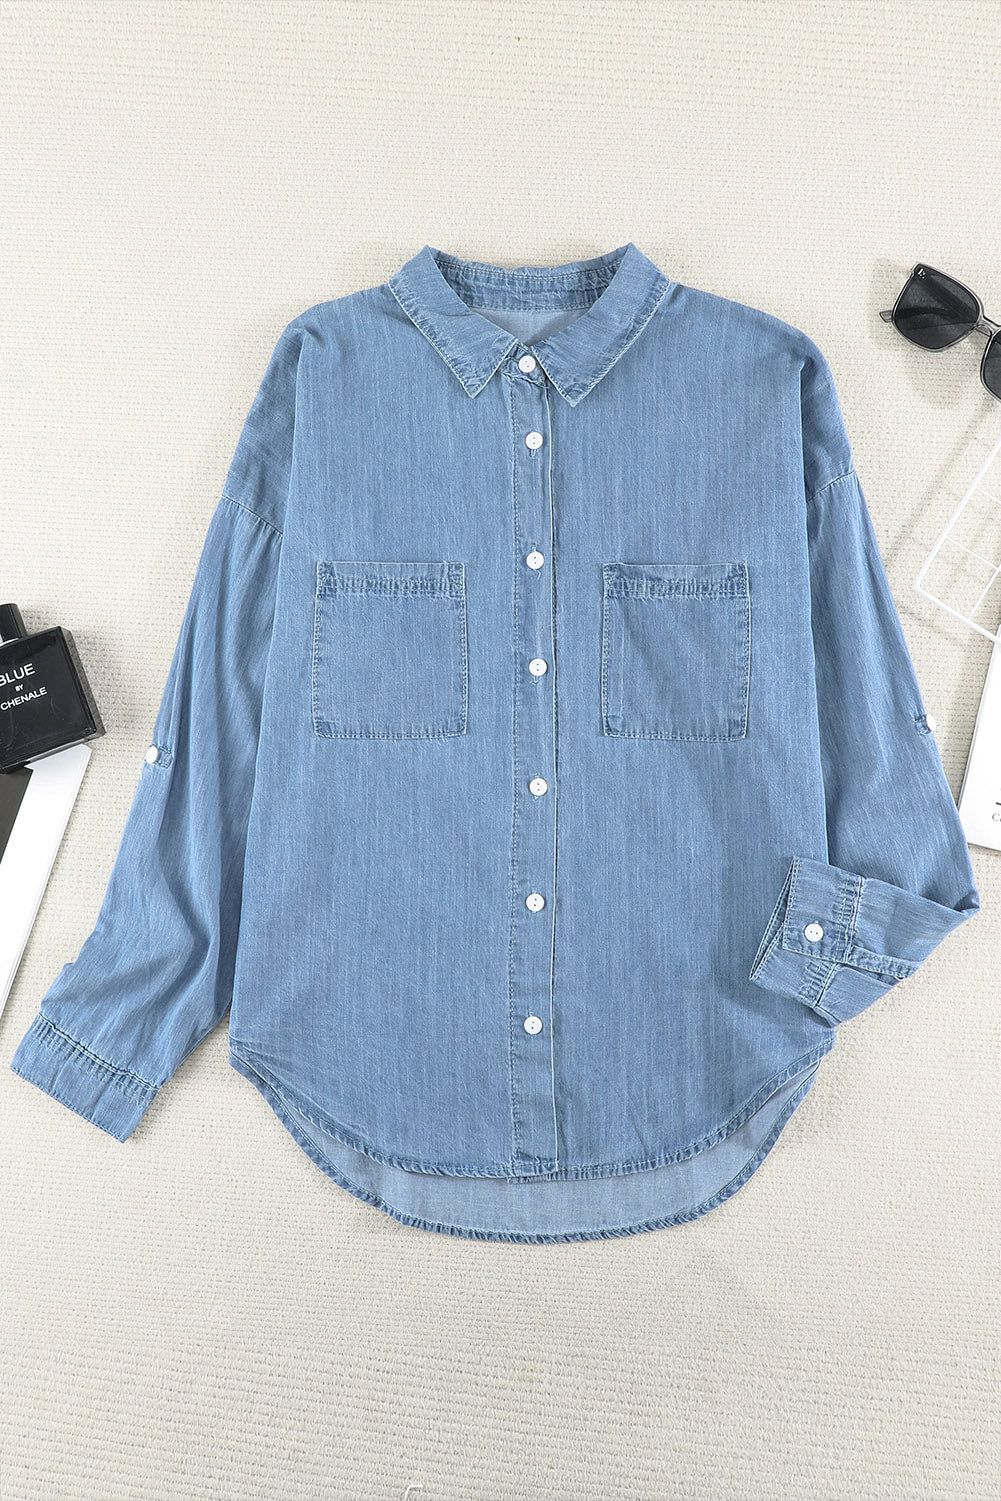 LC2551585-4-S, LC2551585-4-M, LC2551585-4-L, LC2551585-4-XL, LC2551585-4-2XL, Sky Blue Womens Denim Jacket Button Down Long Sleeve Shirts Blouses Tops